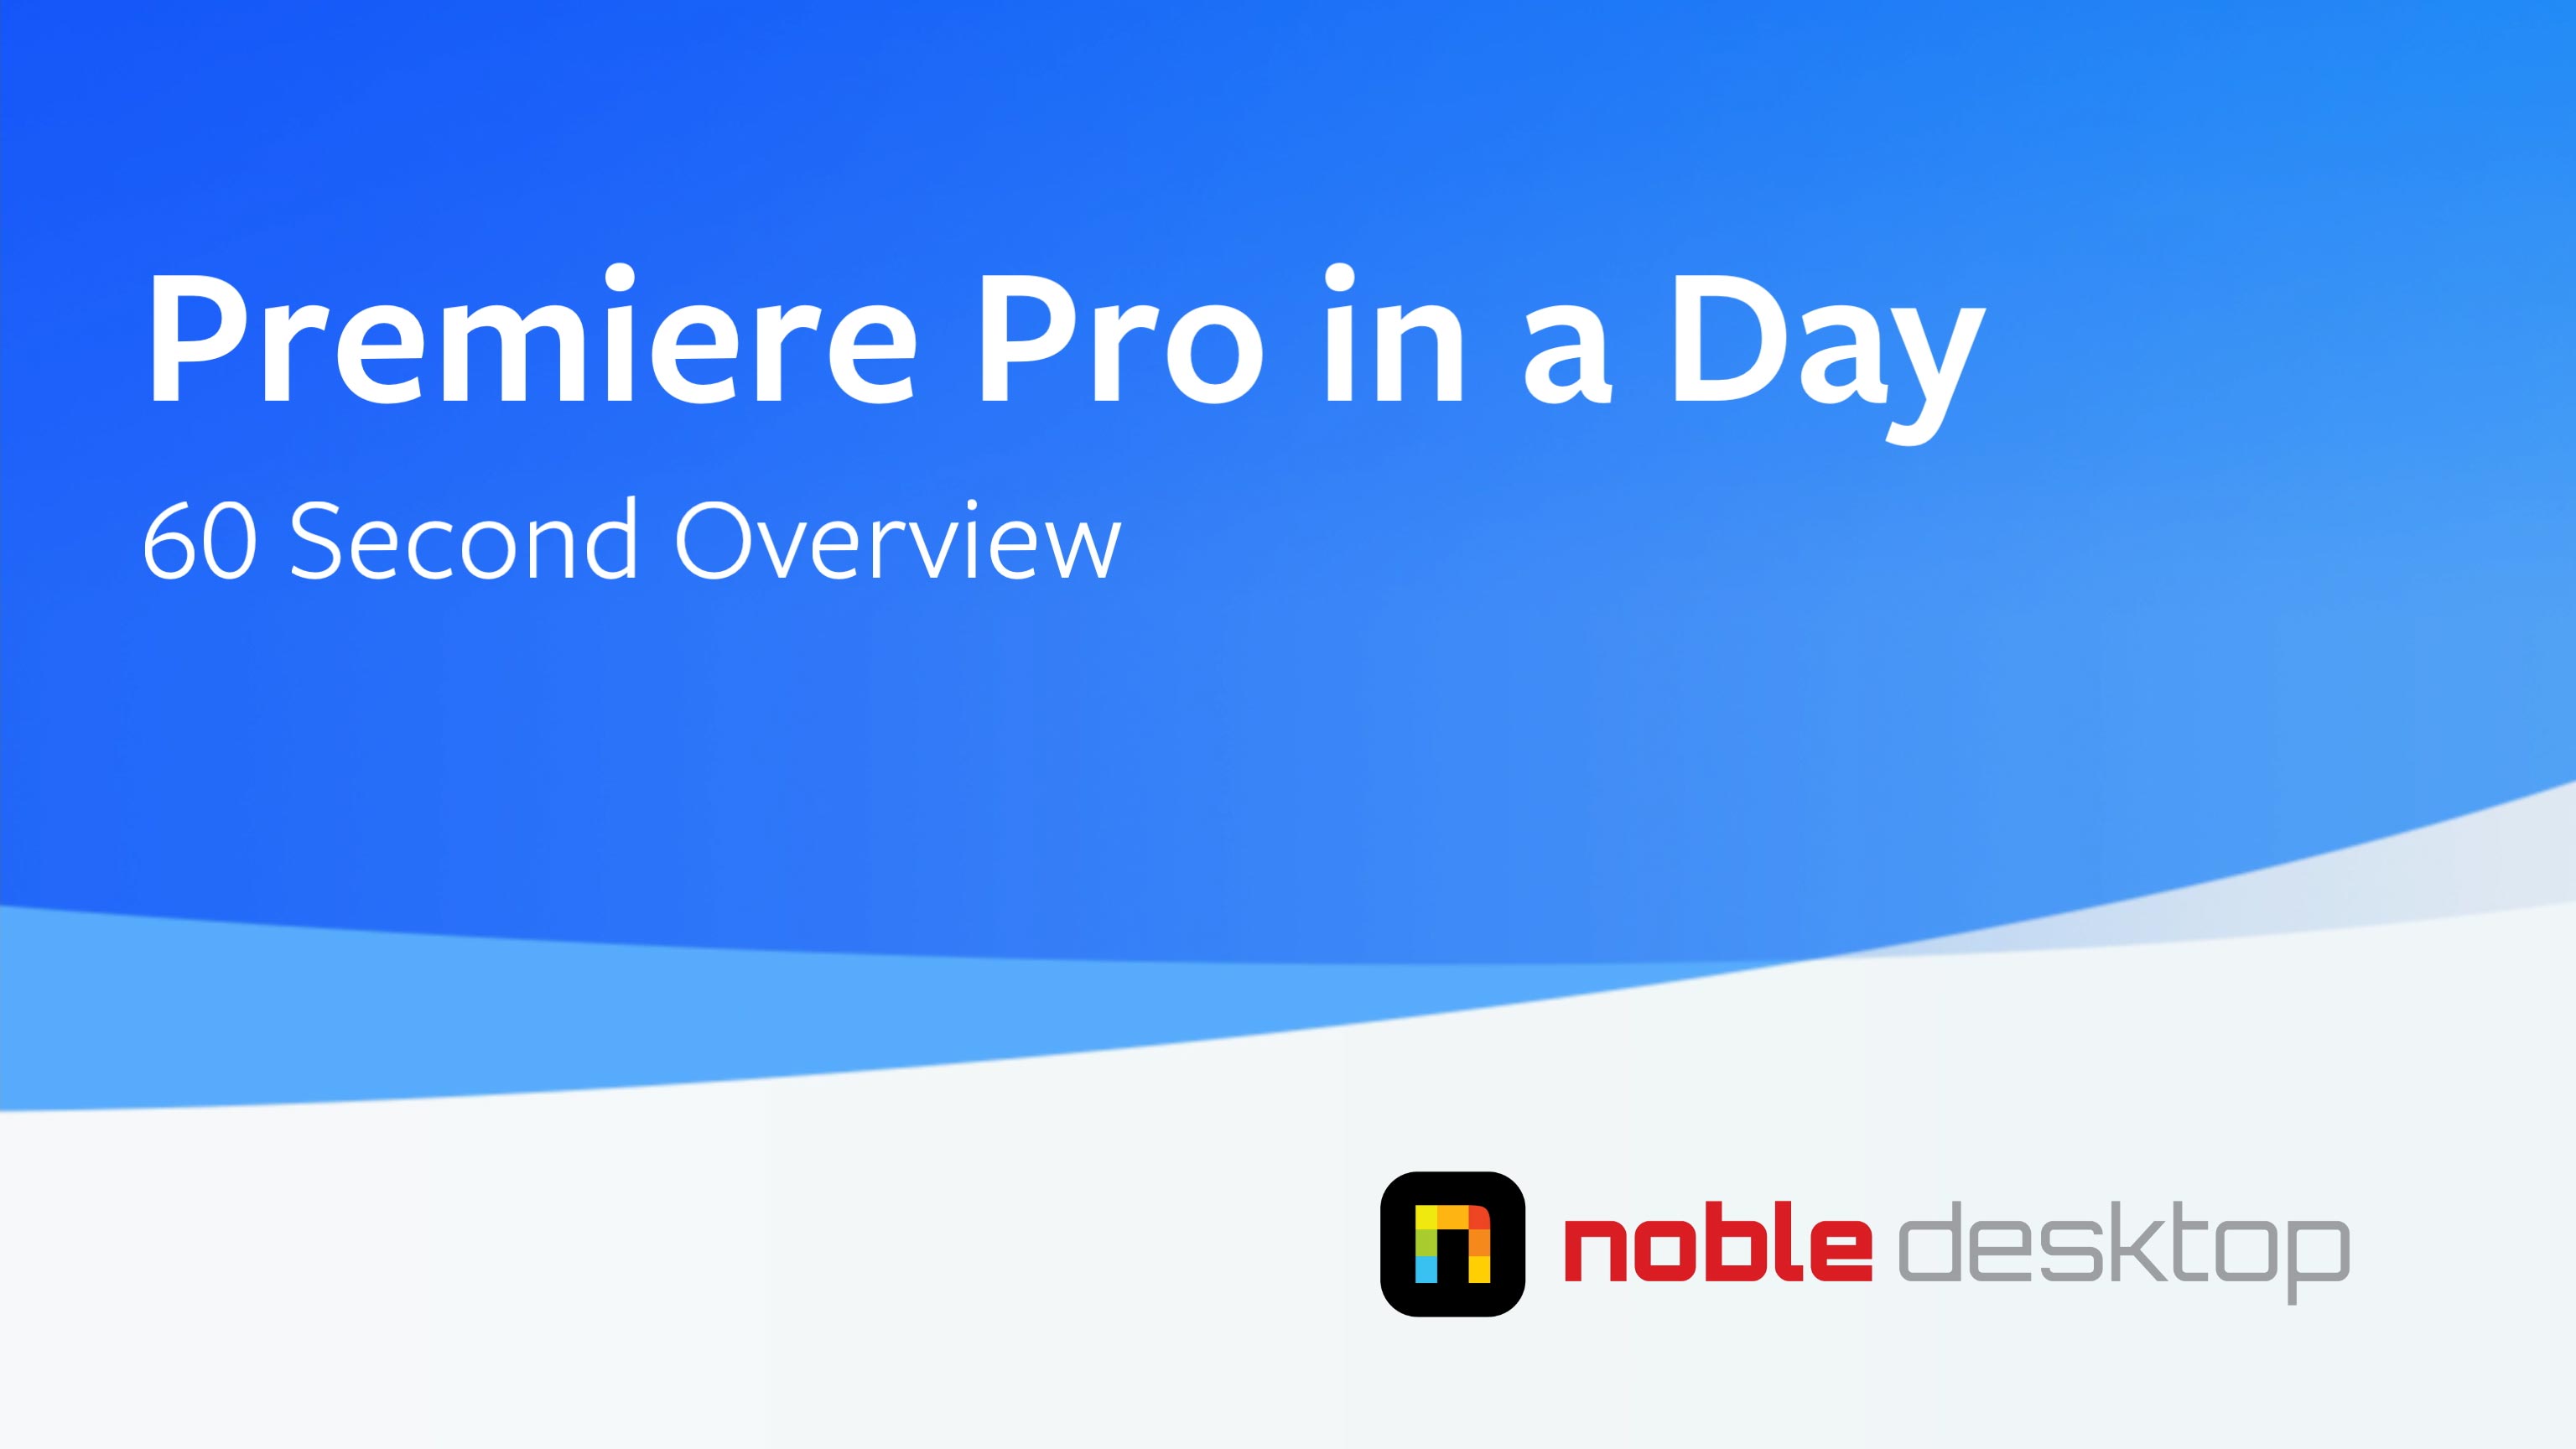 Premiere Pro in a Day Class Overview